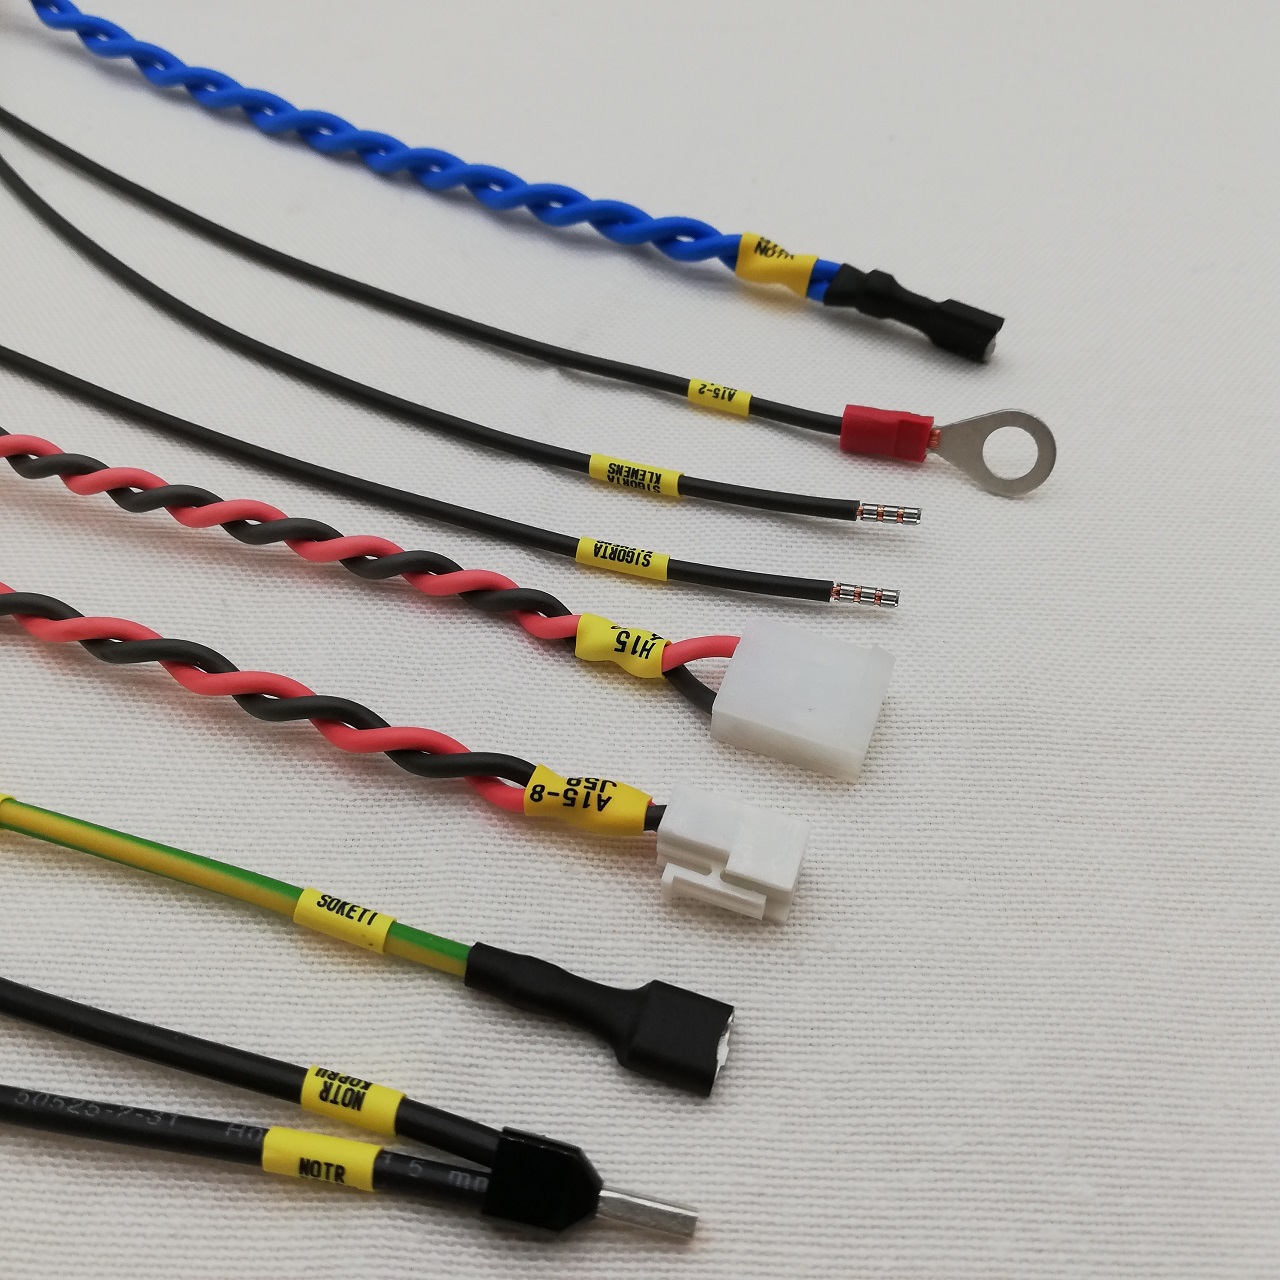 cable assembly, wire harness and electronic production.